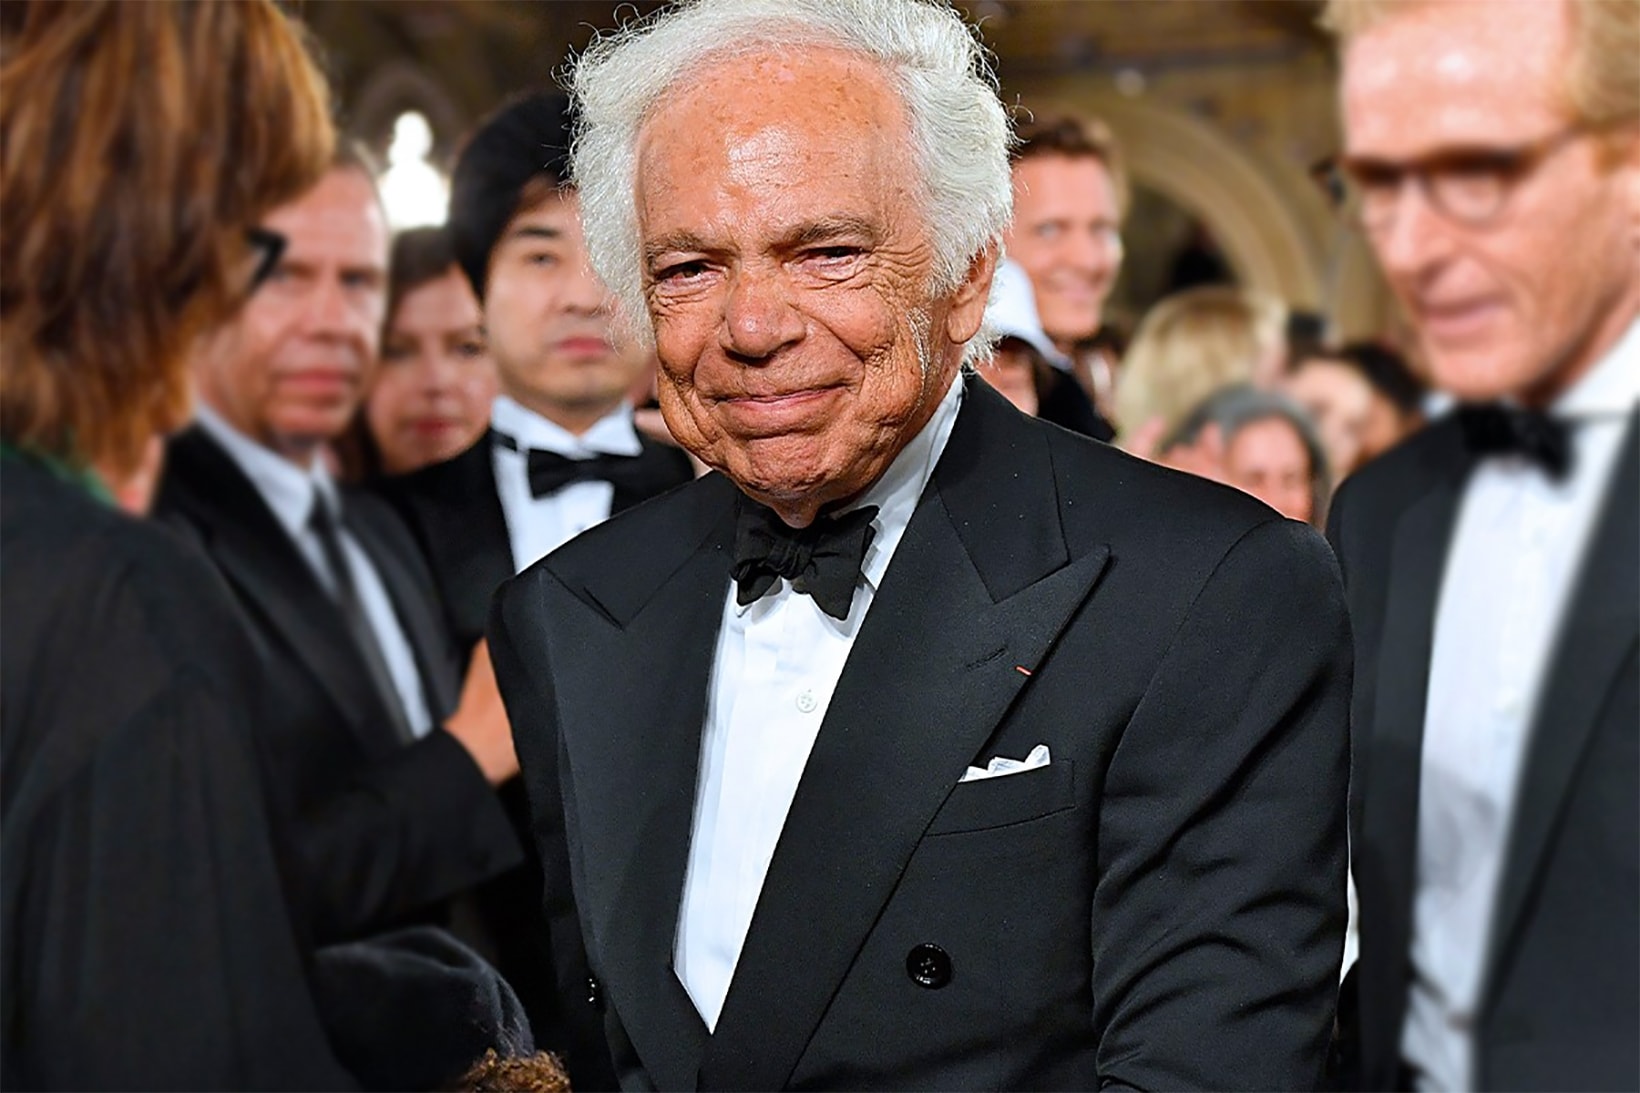 Article>Ralph Lauren is getting his own HBO doc</Article>